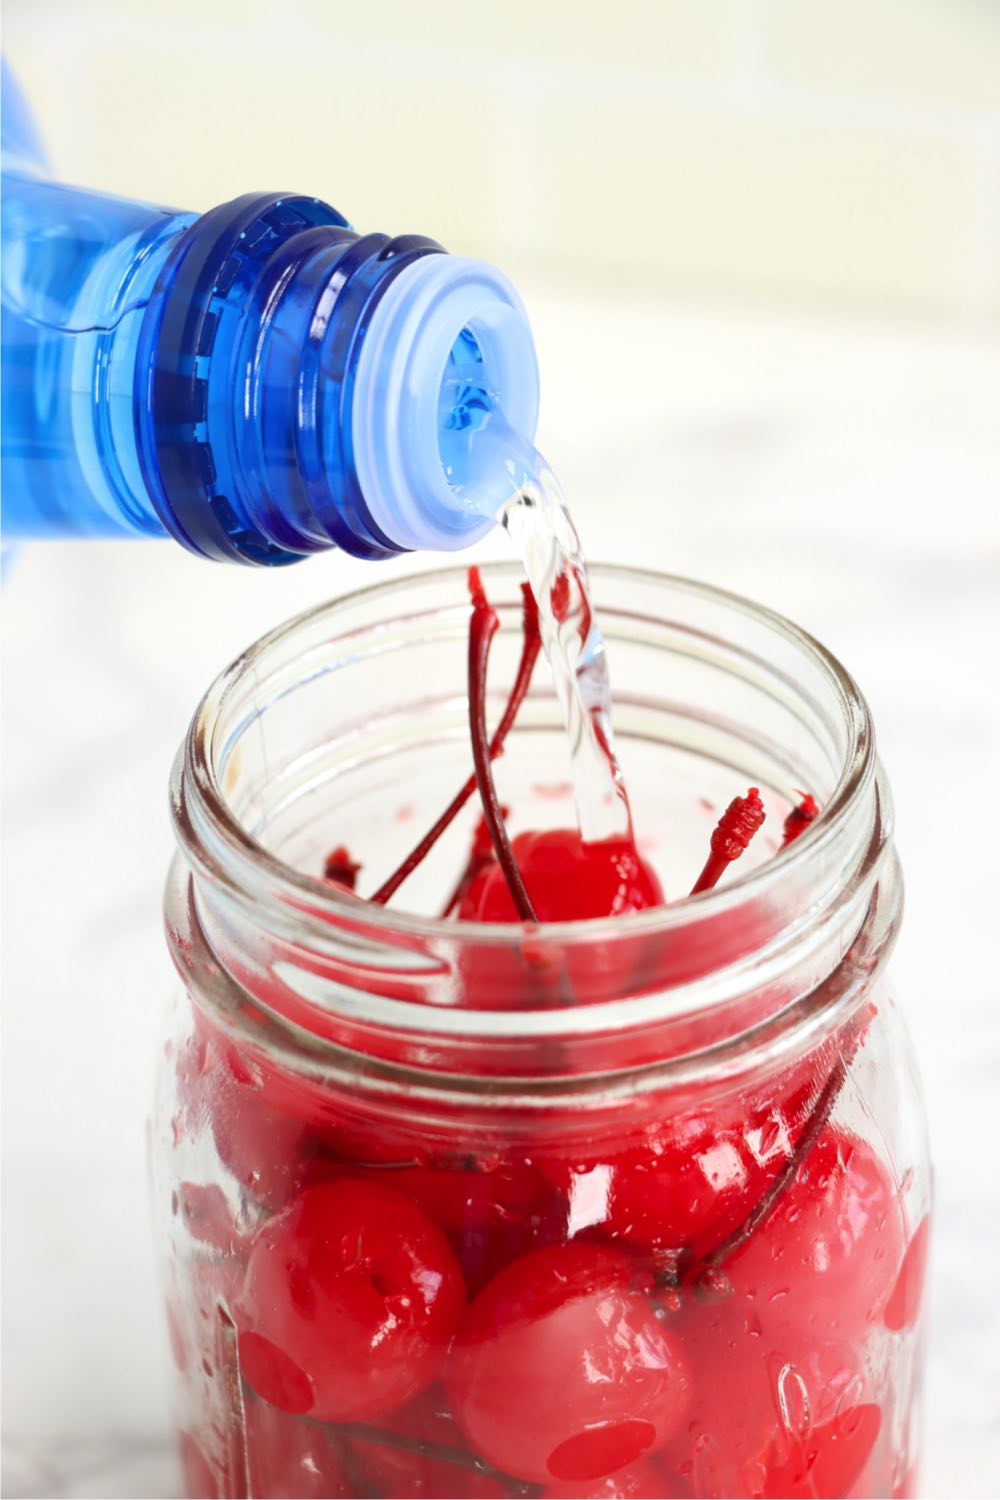 Pouring vodka from a bottle into a glass jar of maraschino cherries.